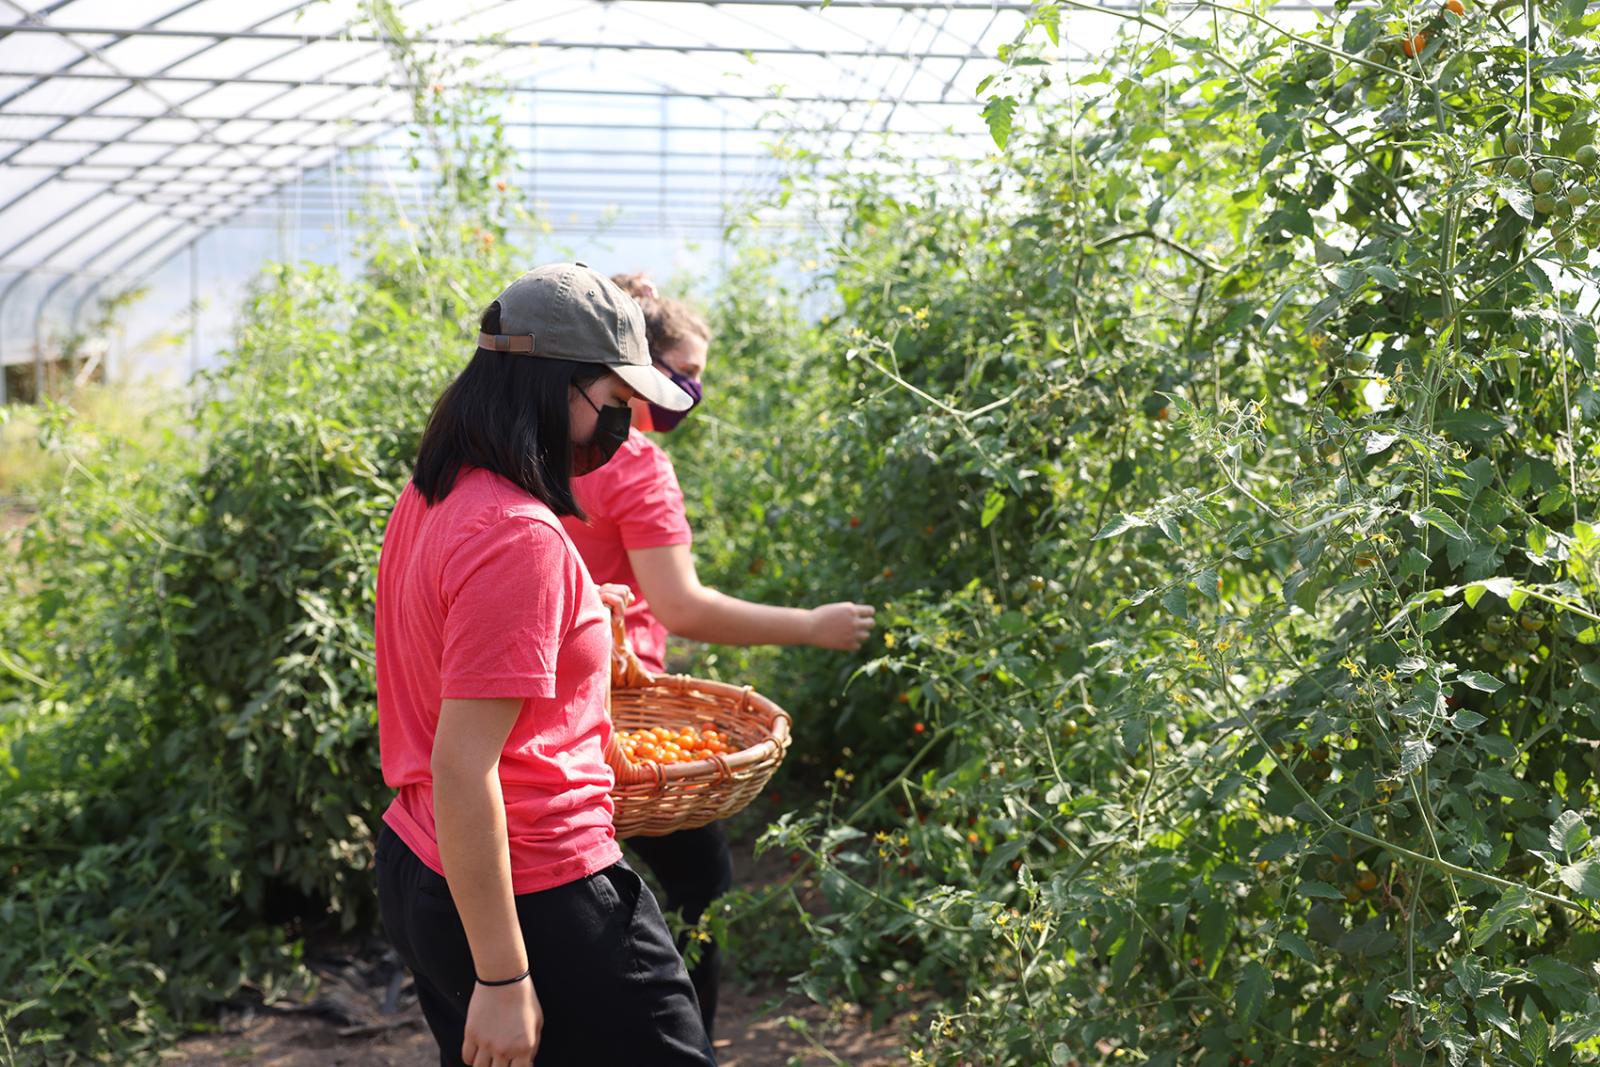 Two students harvest tomatoes in a greenhouse